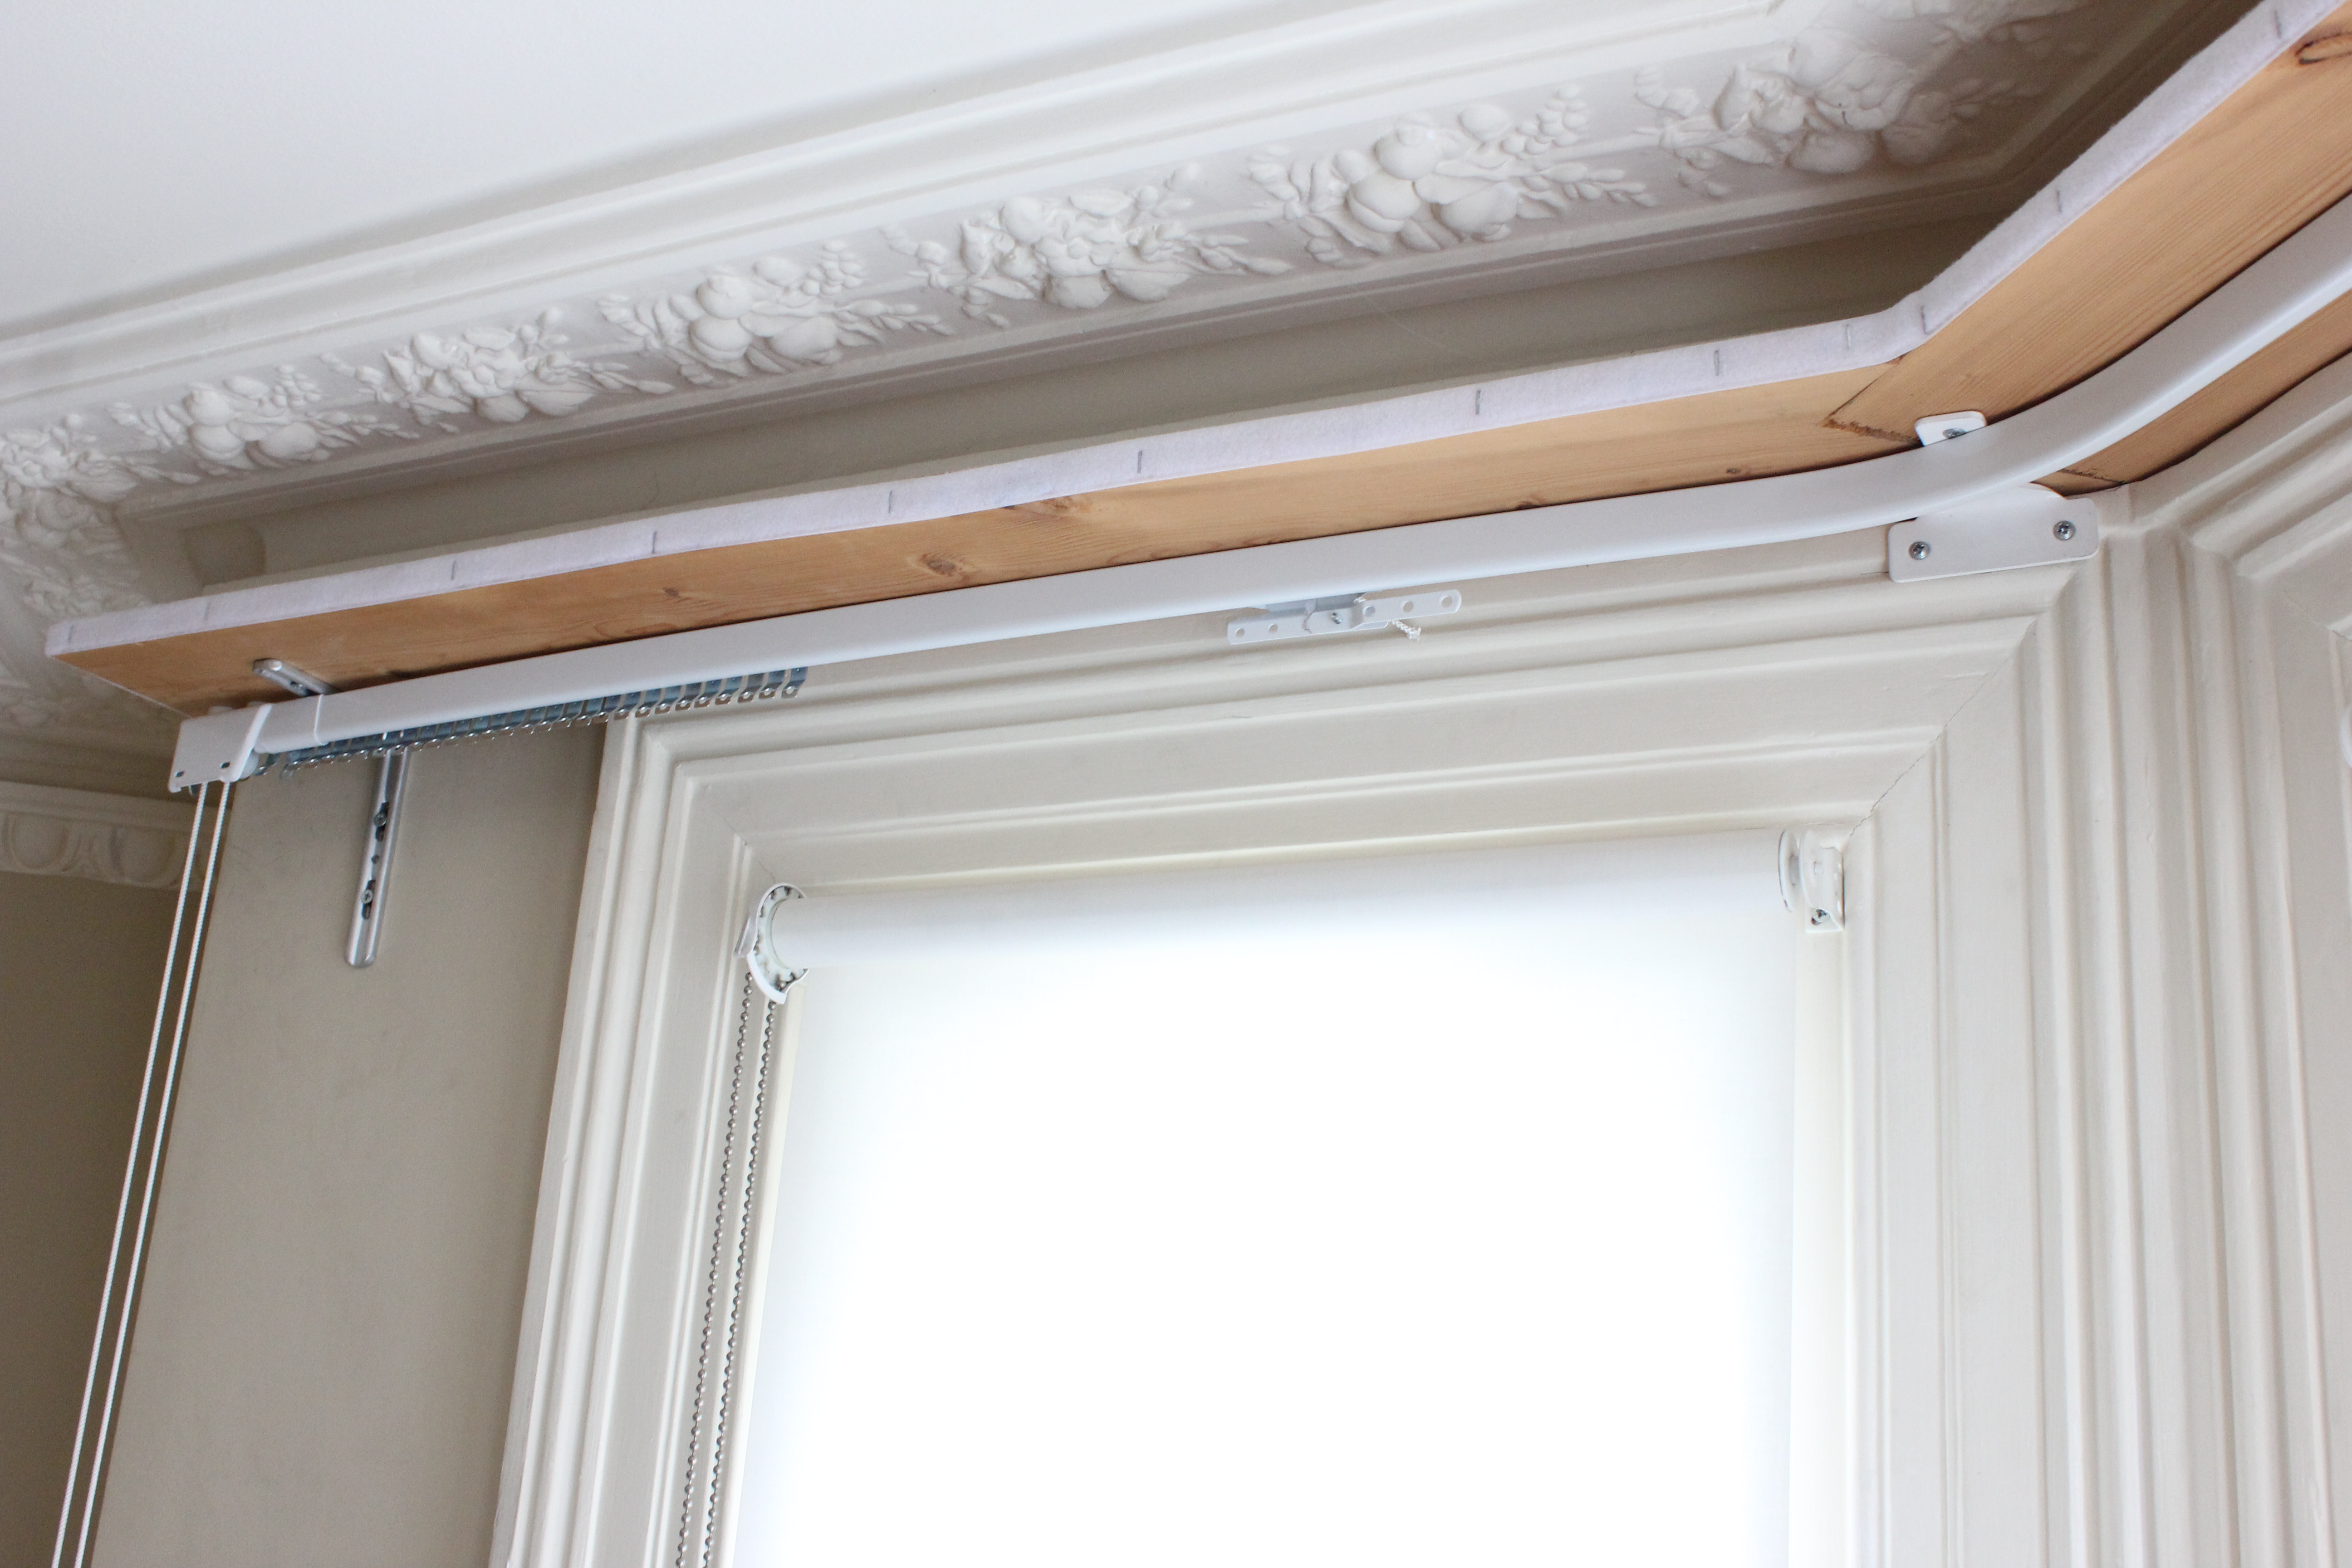 New Heavy Duty Curtain Rail Fitted On A Pelmet Board For A Bay